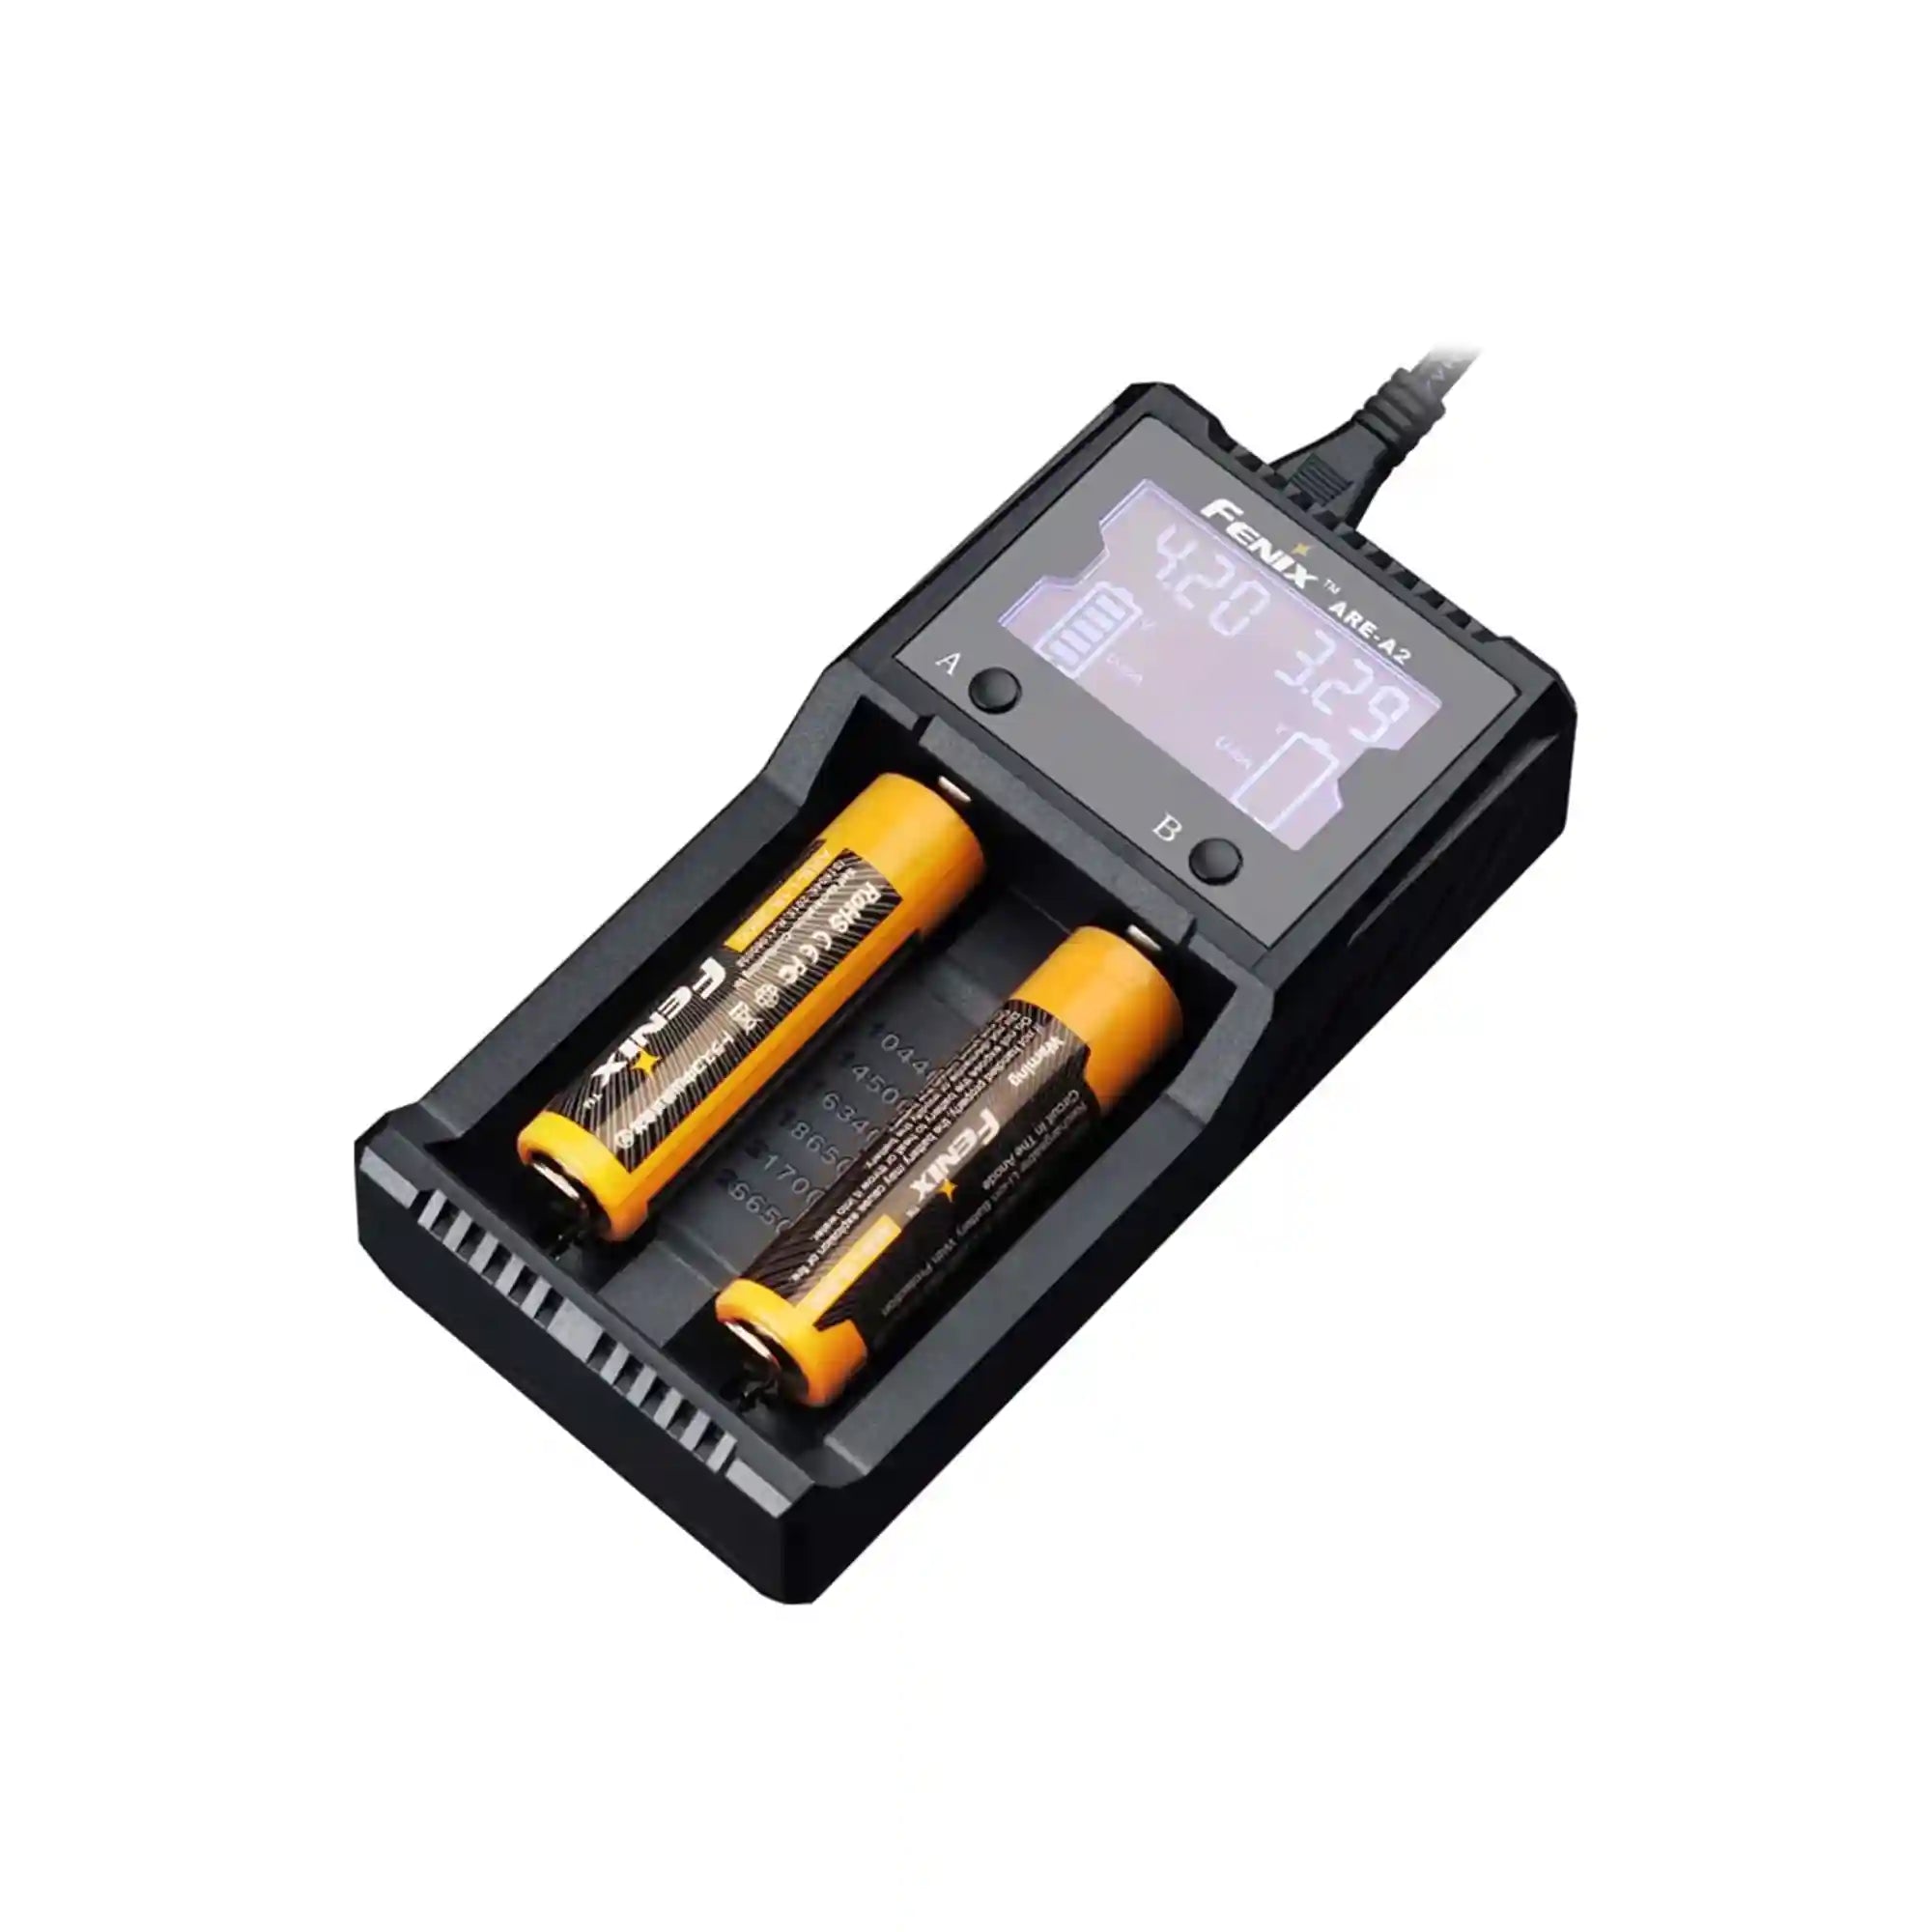 ARE-A2 Battery Charger